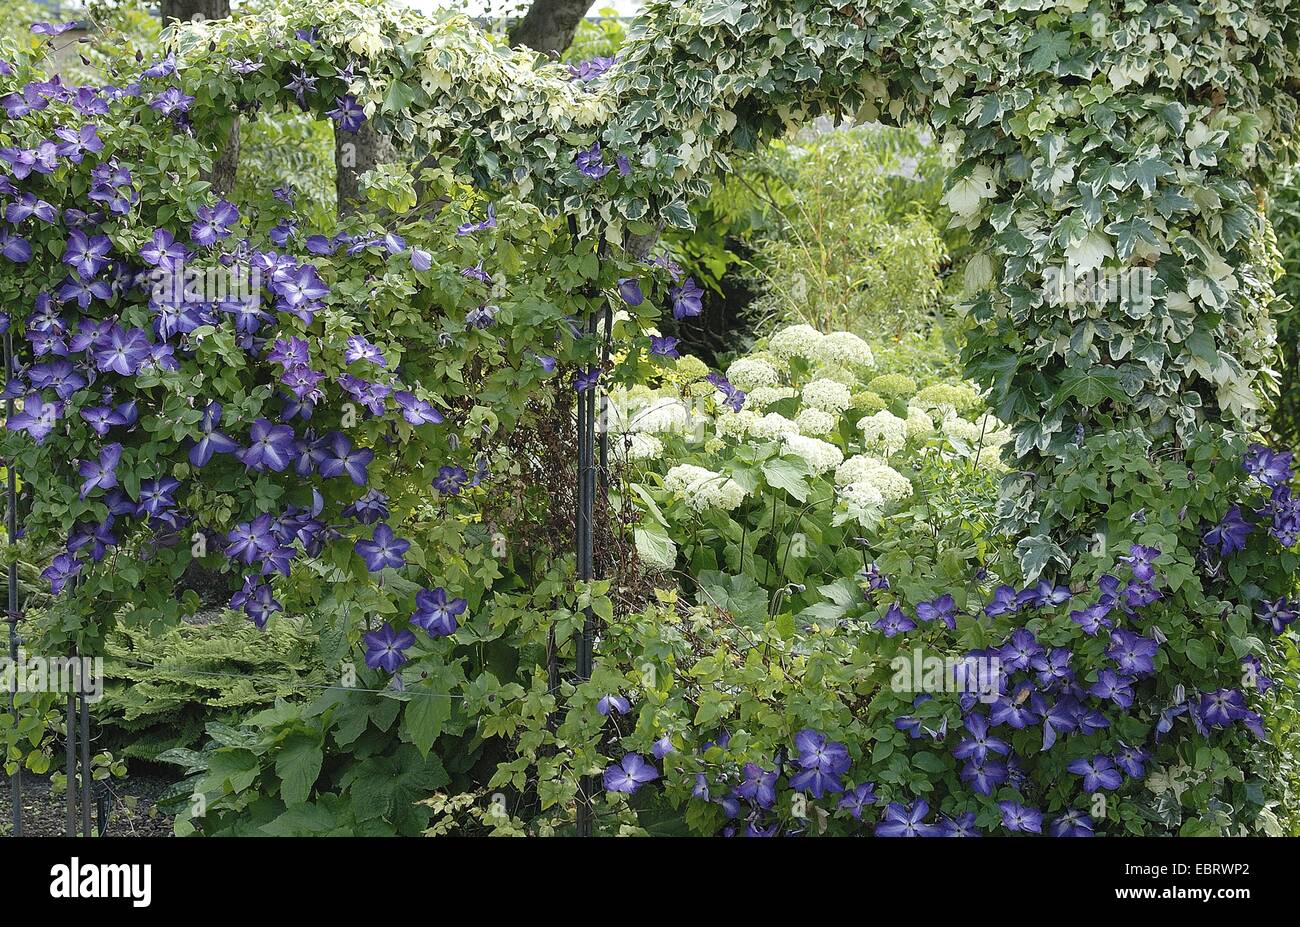 English ivy, common ivy (Hedera helix 'Glacier', Hedera helix Glacier), with Clematis and hydrangea Stock Photo